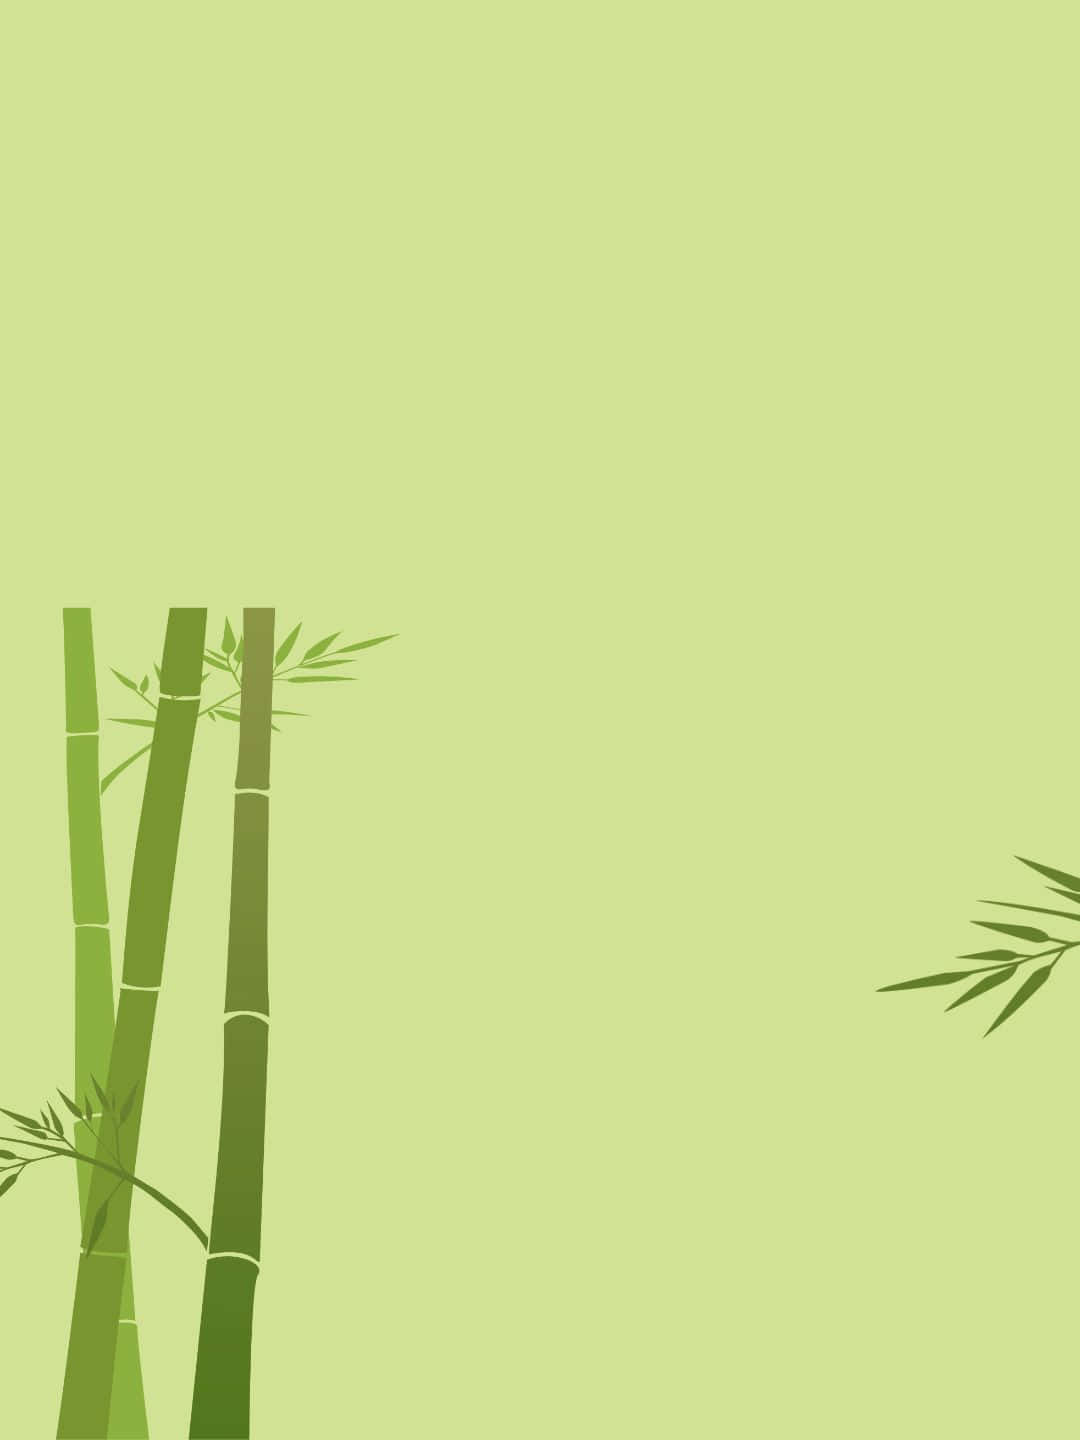 1440p Bamboo Background Cropped Drawing Of Bamboo Trees